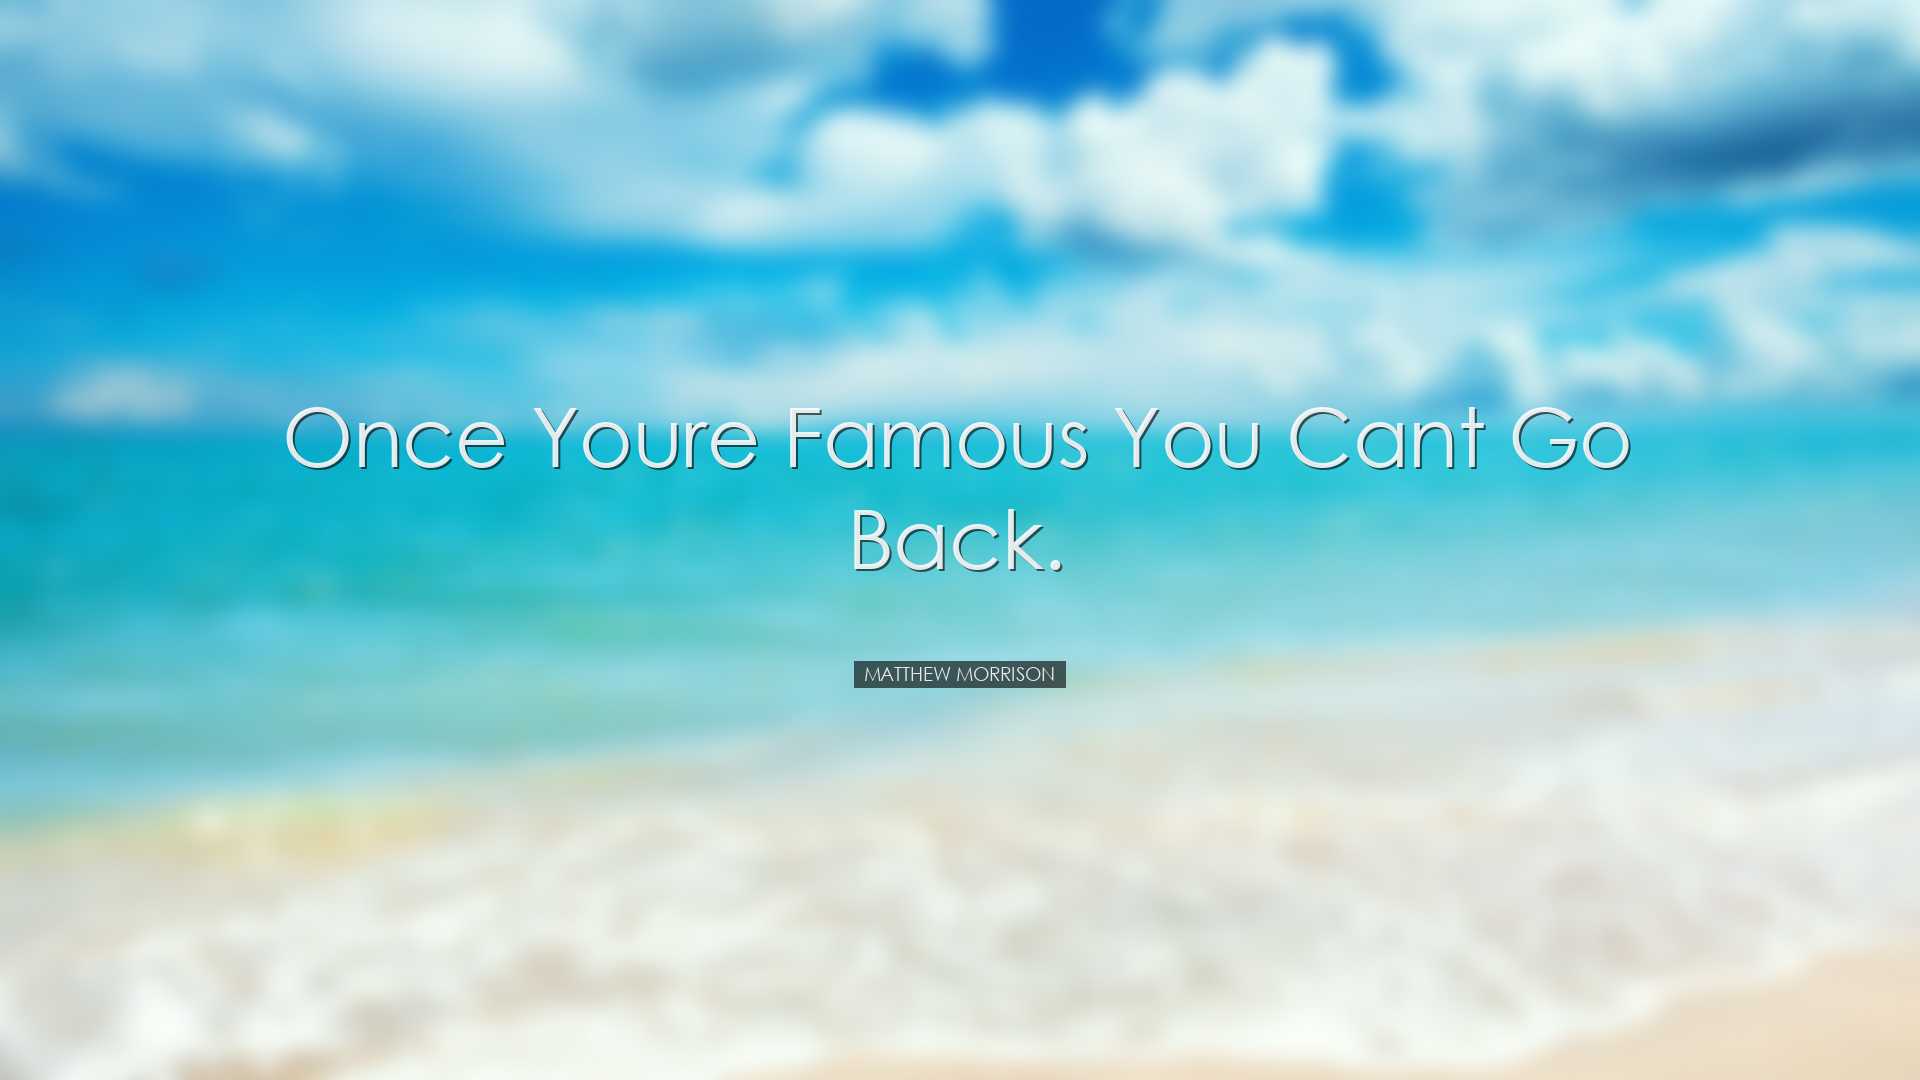 Once youre famous you cant go back. - Matthew Morrison